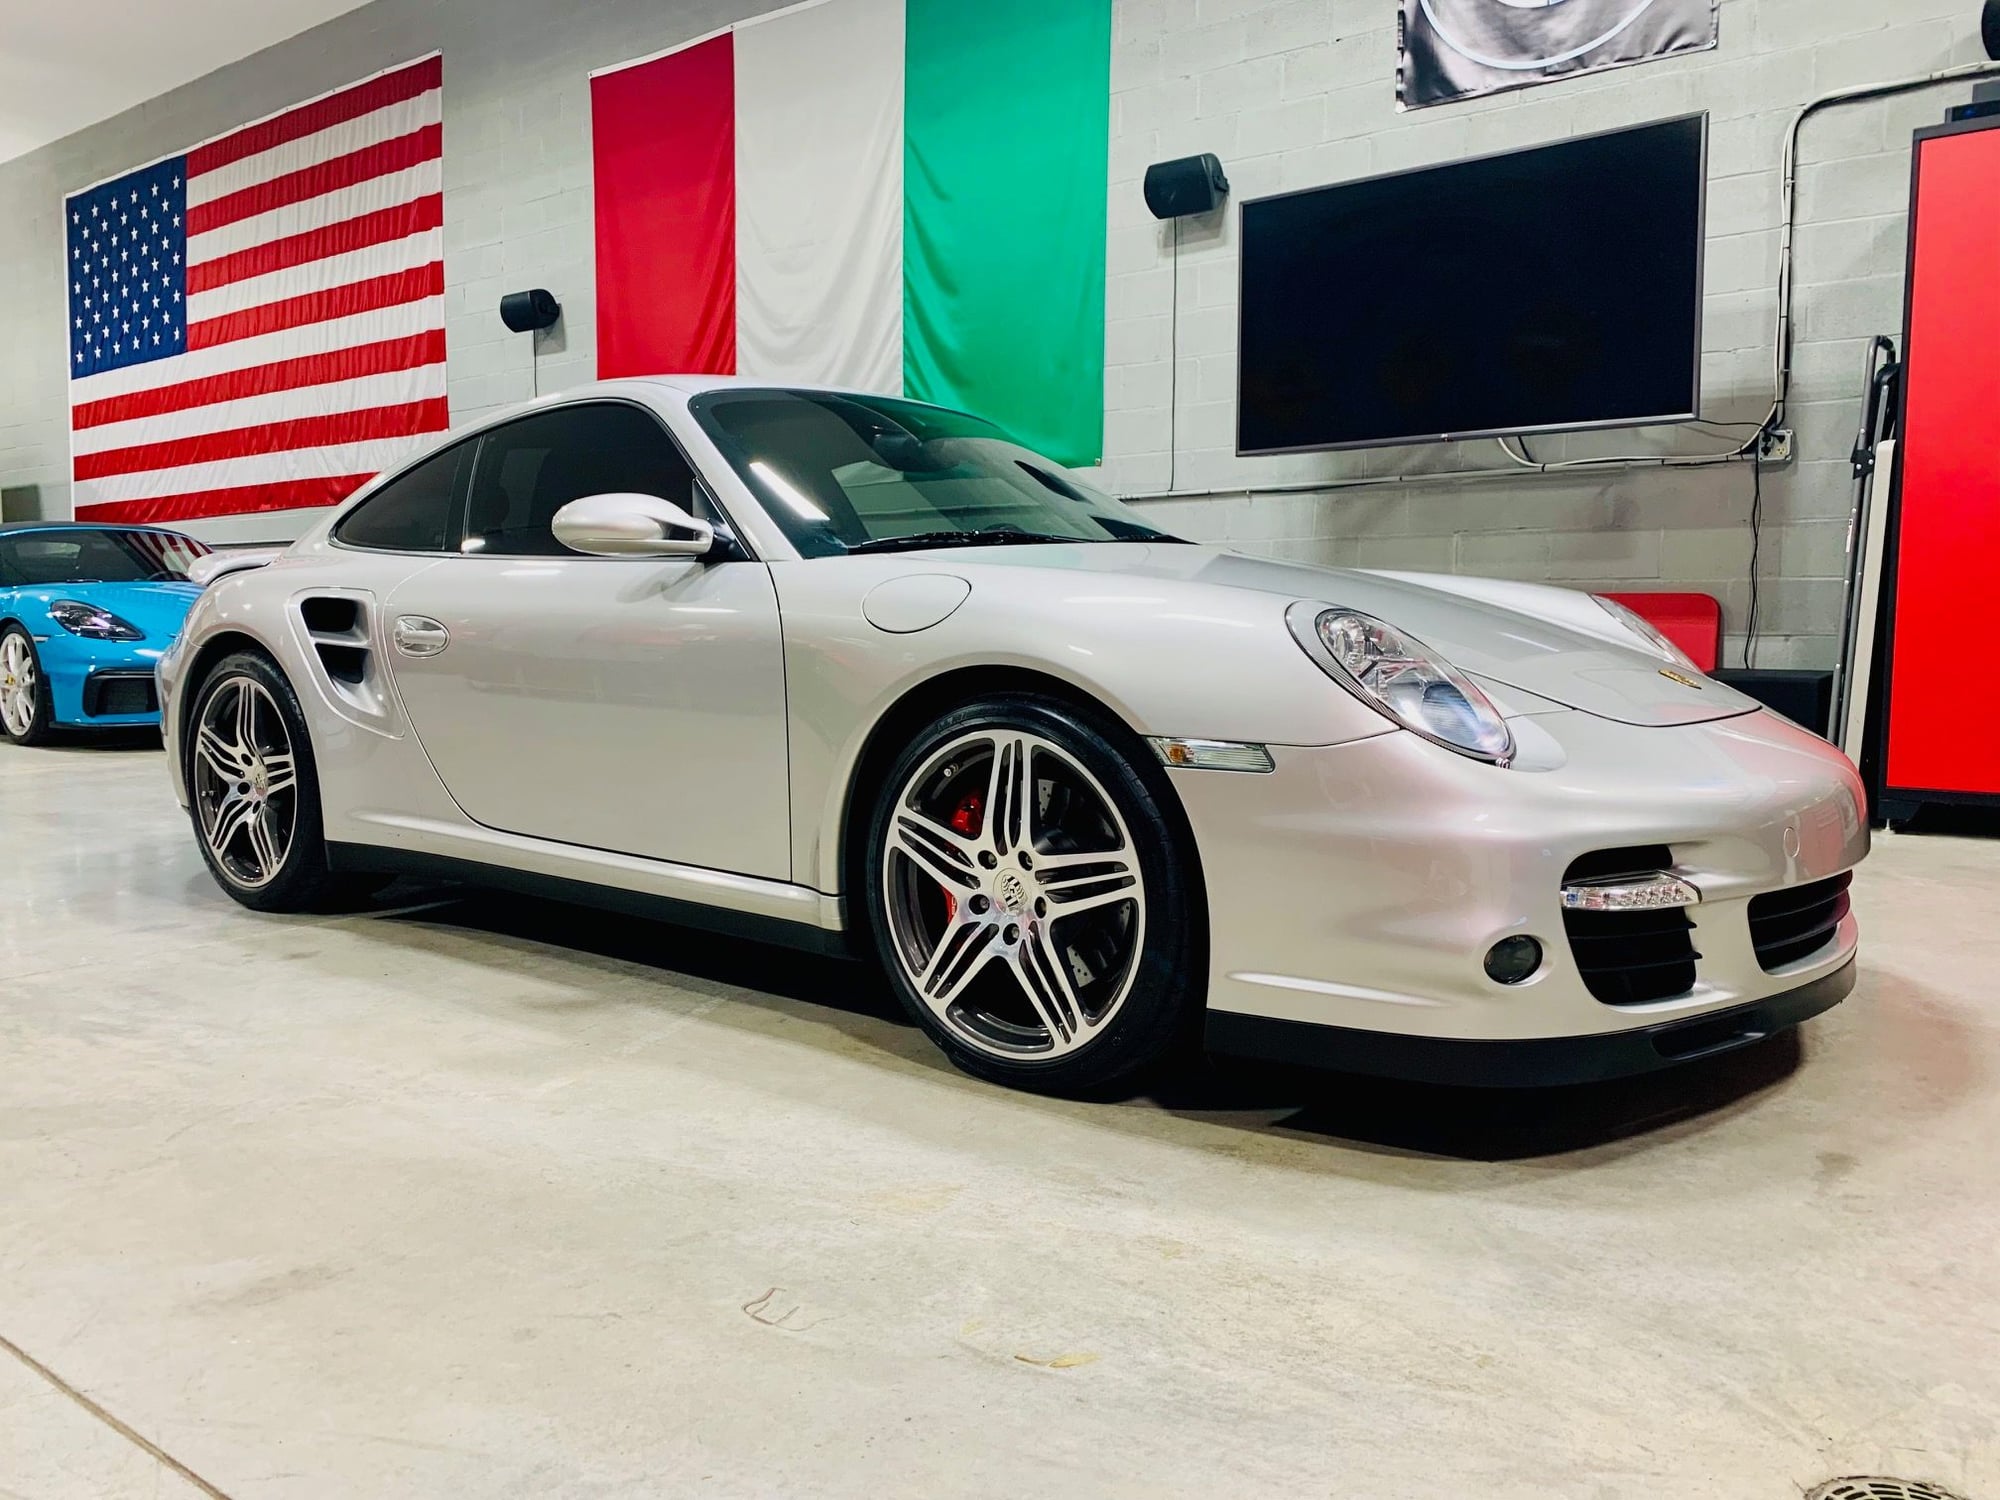 2007 Porsche 911 - 2007 Porsche 911 997 Turbo 6-Speed Manual - Used - VIN WP0AD29997S78359 - 17,122 Miles - 6 cyl - AWD - Manual - Coupe - Silver - Lexington, KY 40509, United States